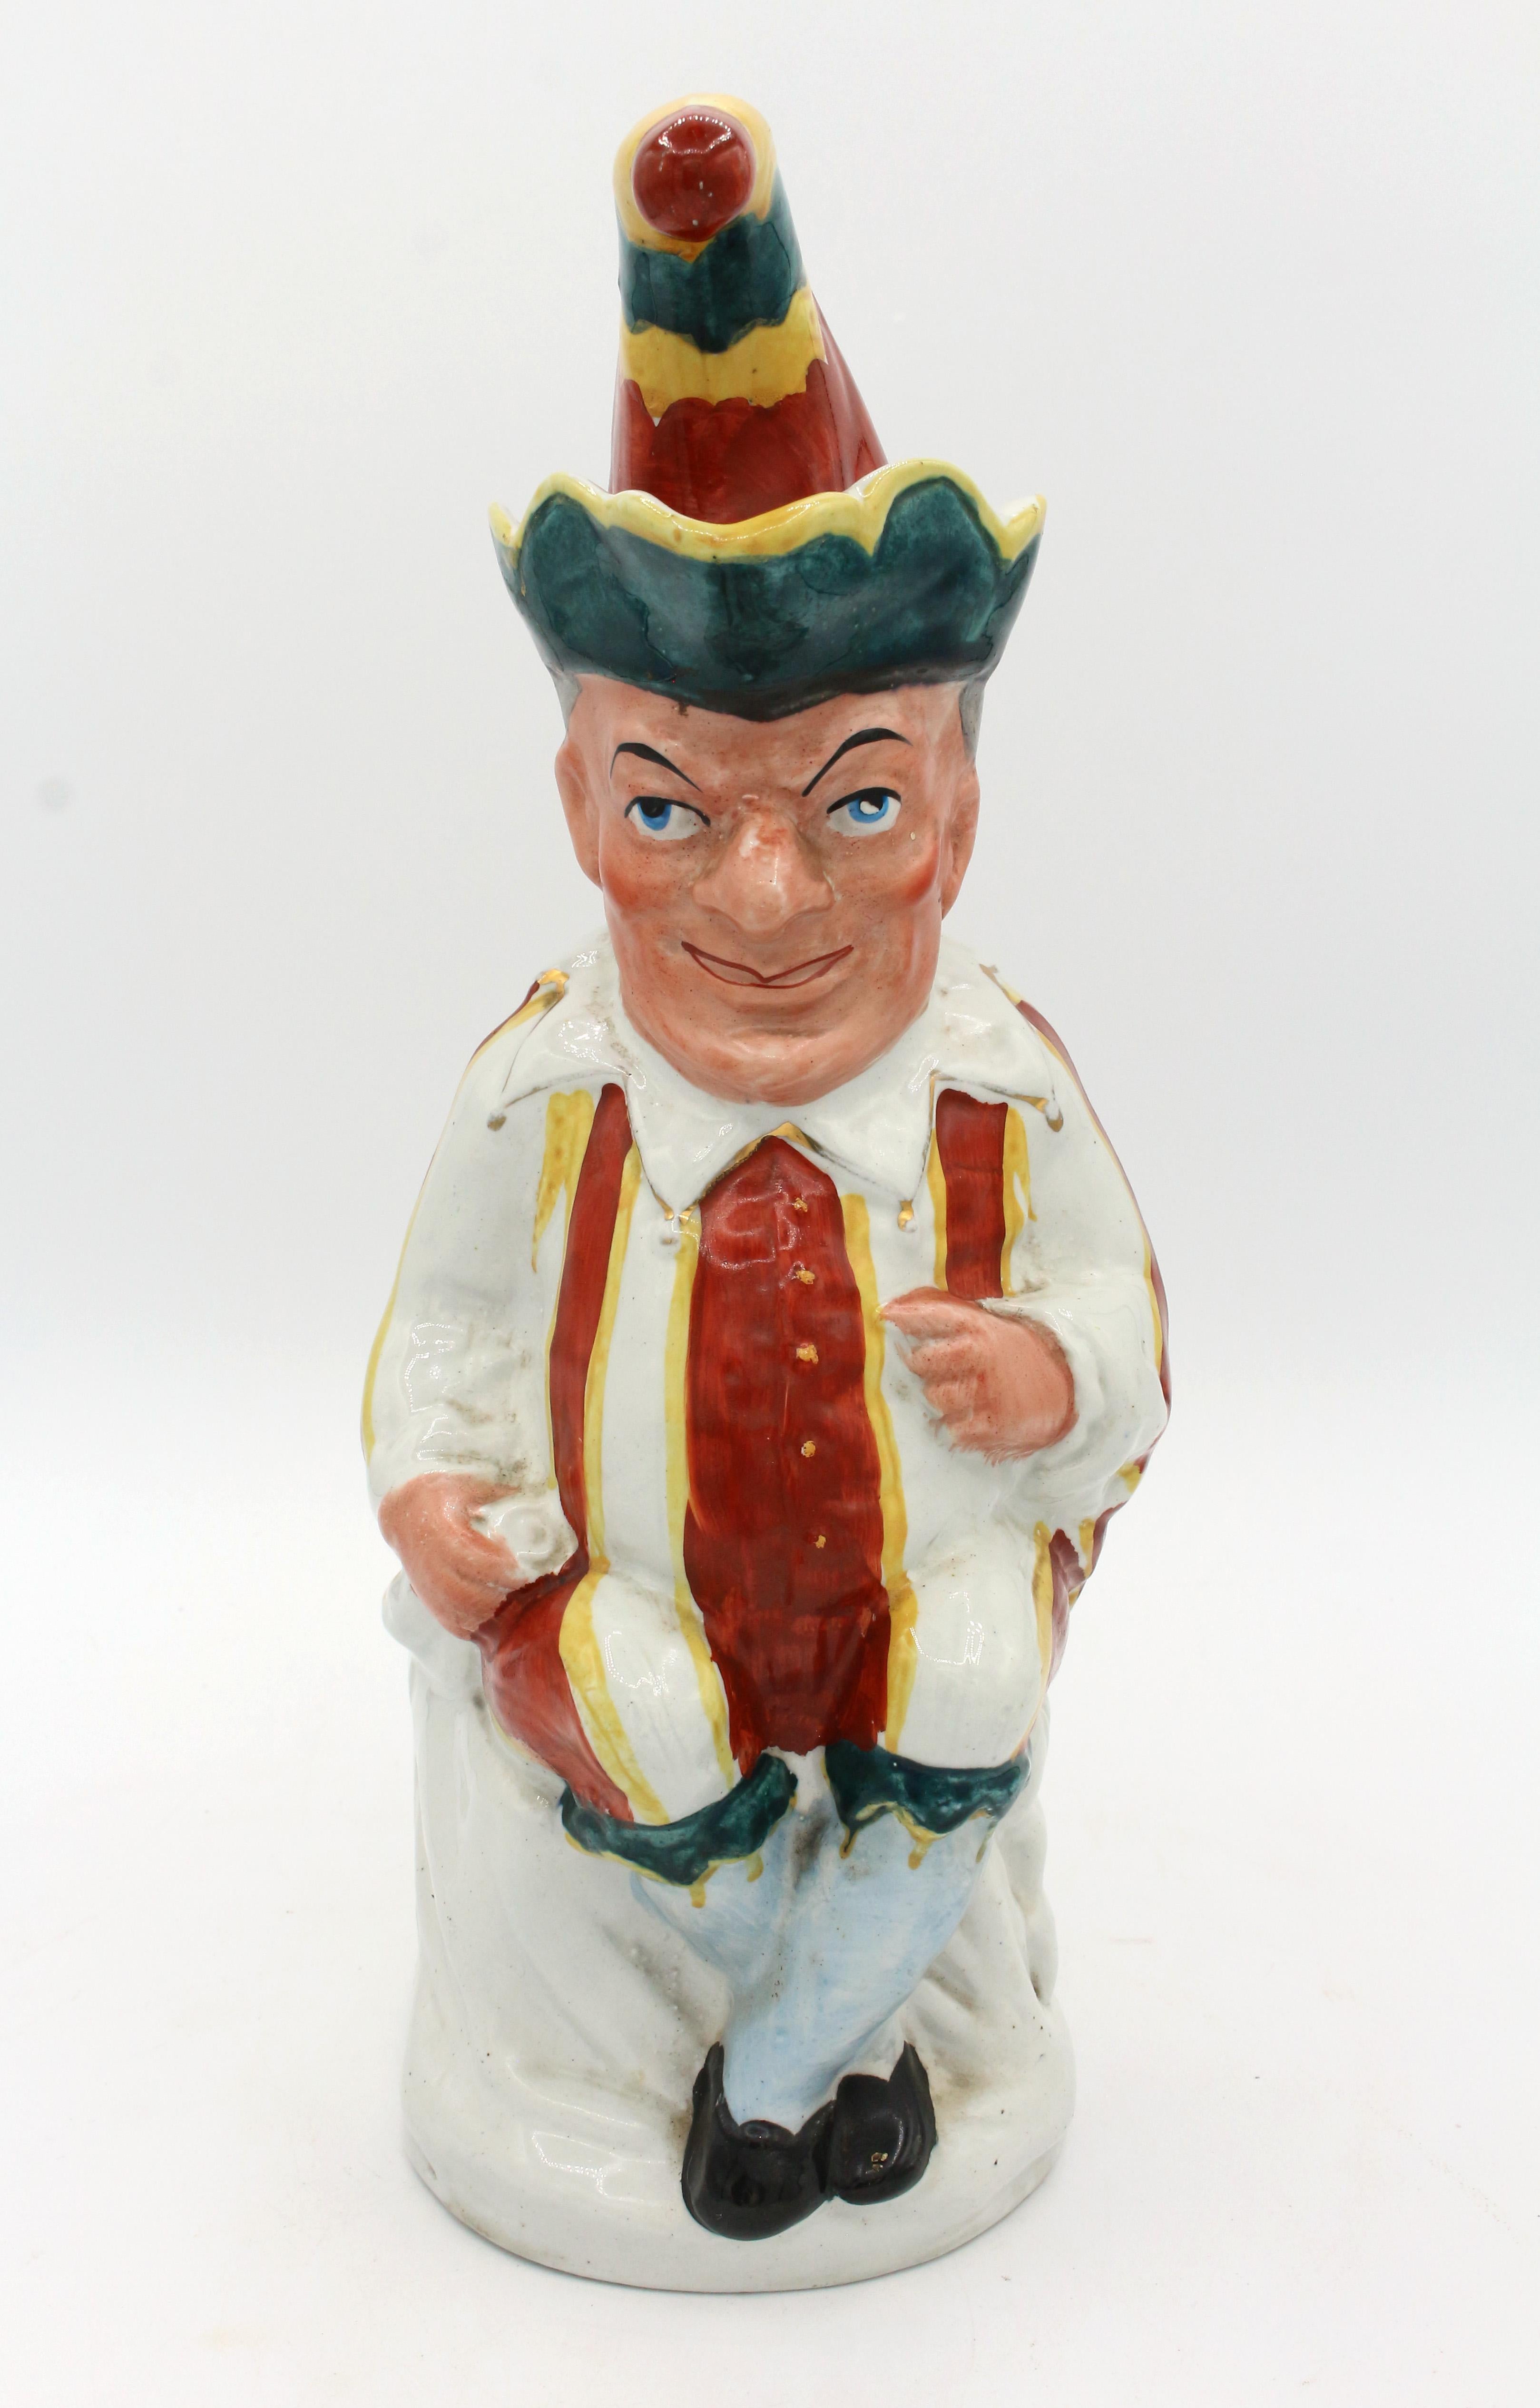 A hilarious Punch figure Toby Jug by William Machin, England, 1889-1910. Hawley, Staffordshire. Impressed registration number 